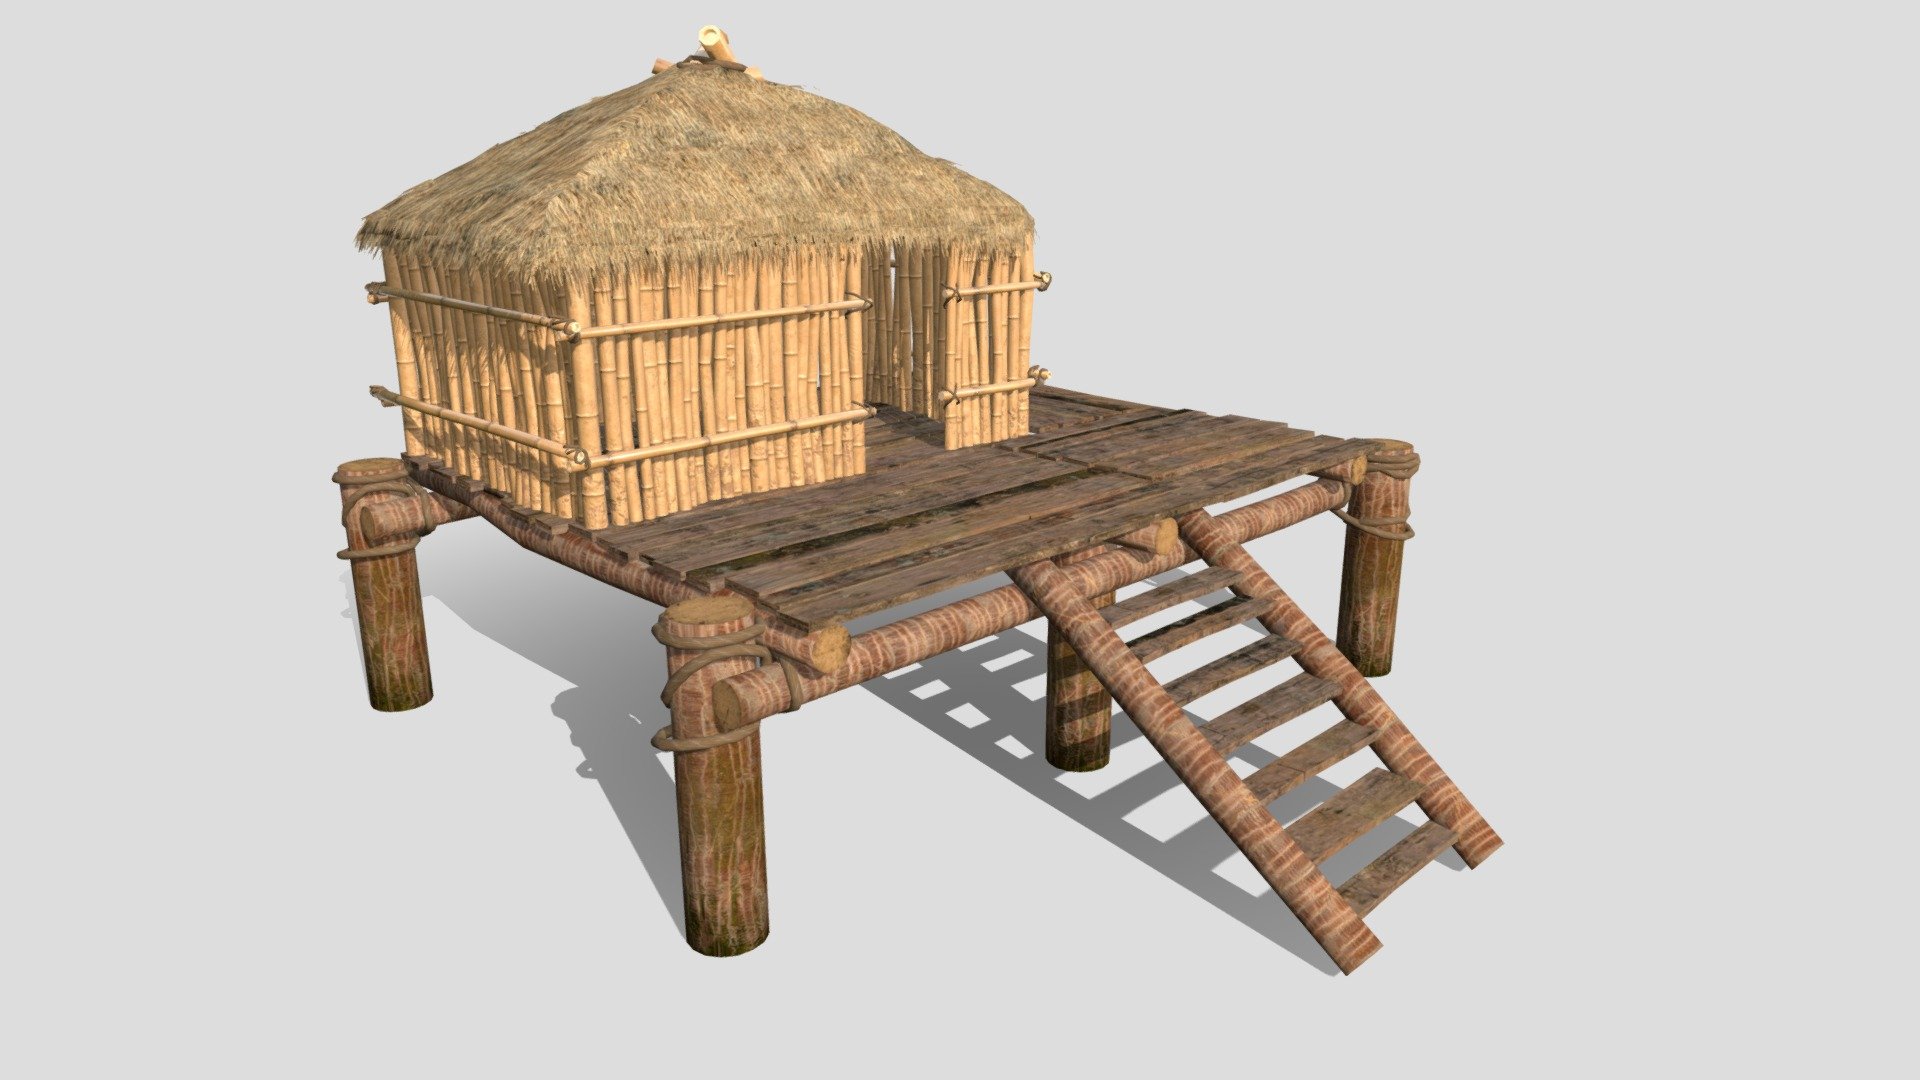 This is a 3D-model of a tropical beach hut made from bamboo, palm trunks and a thatched roof which fits perfectly into your beach/tropical/holiday/shipwreck/… scene or game.
This model was built with the focus on Low-Poly modeling while still having a high quality to allow close-up shots for your scenes.

The object is separated into 9 different parts that you can easily edit:
Bamboo Wall, Bamboo Additional, Boards Floor, Boards Stair, Palm Logs, Roof, Roof_Alpha, Rope Large and Rope Small.

The textures are separated into 6 different parts, each containing Albedo, Normal and Roughness maps.

2k maps: (2048x2048)
-Bamboo_Wall 
-Bamboo_Additional 
-Boards 
-Palm_Logs 

1k maps (1024x1024)
-Roof (contains 1 Alphamap)

512x512 maps
-Rope - Bamboo Beach Hut with thatched roof - Buy Royalty Free 3D model by master_edd 3d model